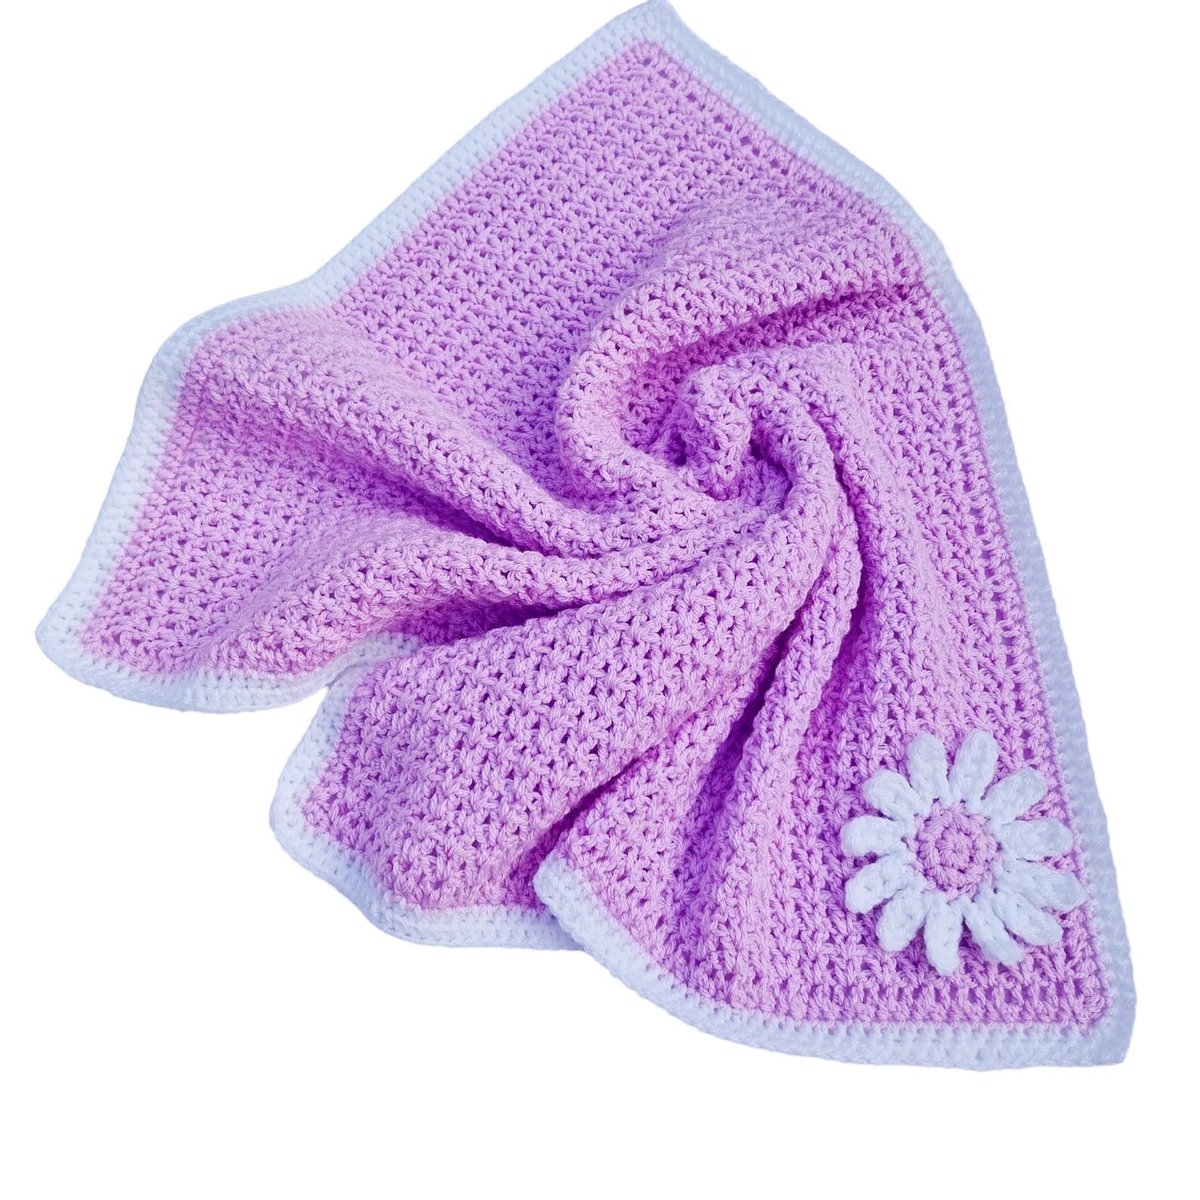 Snuggle your baby in this exquisite lilac blanket, hand-crocheted in a V stitch, adorned with white daisies. A perfect gift for your little one. Available at #Knittingtopia on #Etsy. Don't miss it! knittingtopia.etsy.com/listing/158321… #babyshowergifts #handmade #craftbizparty